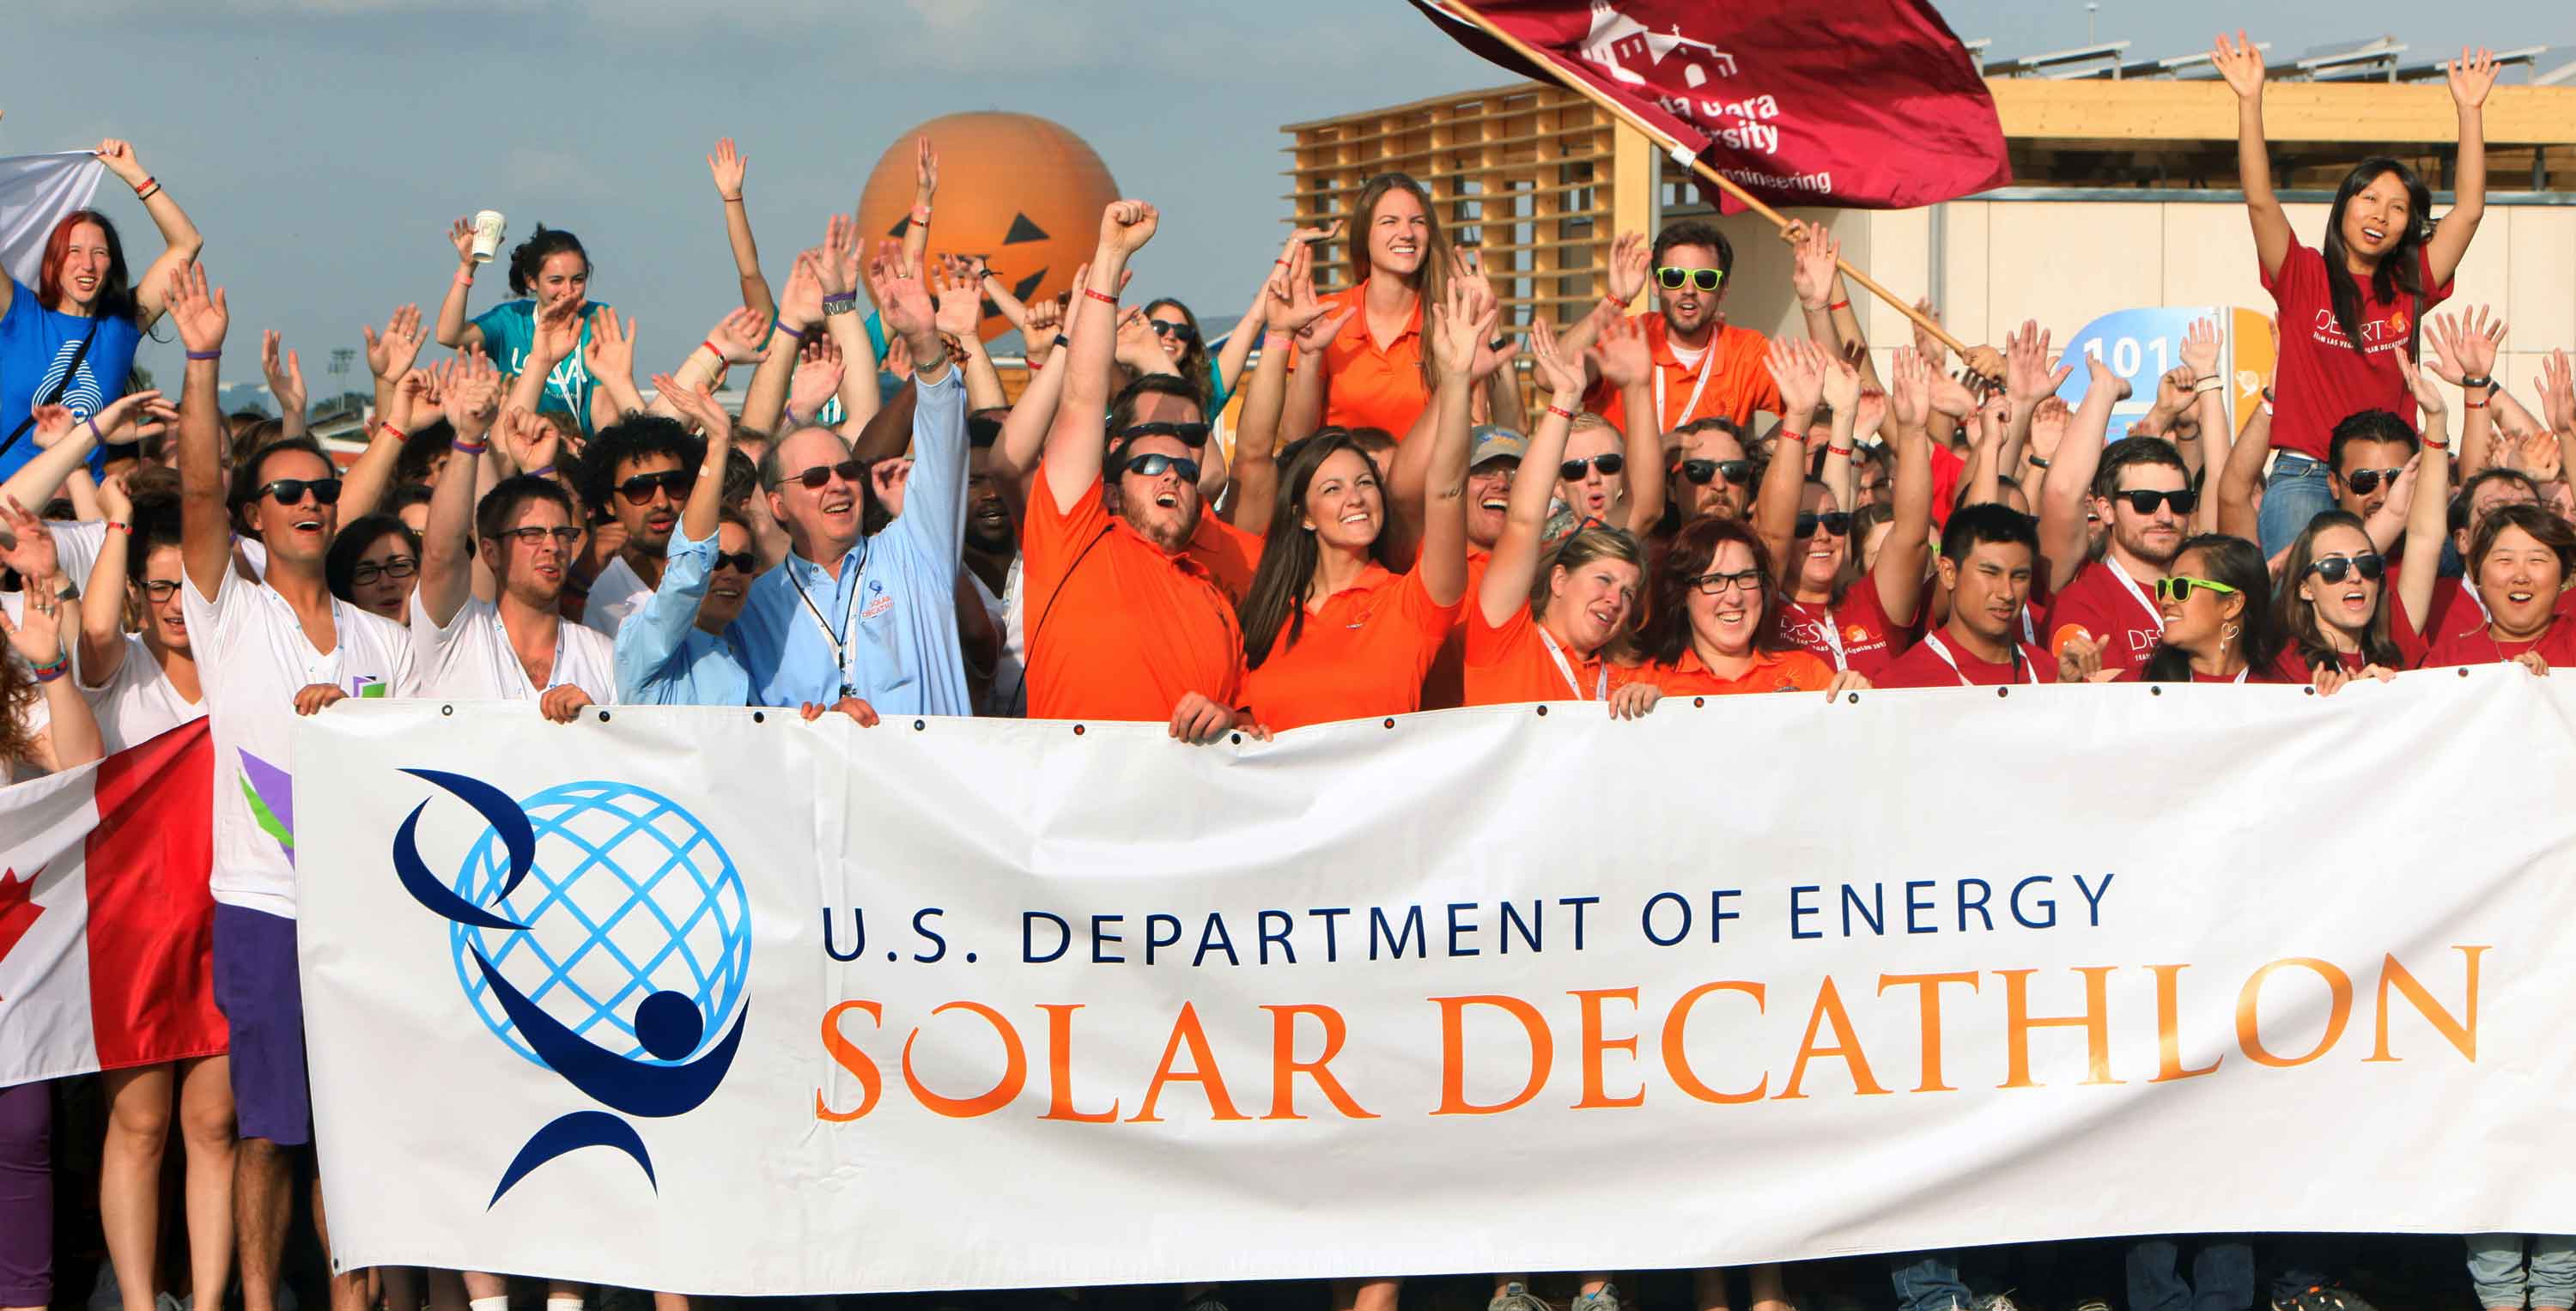 Photo of a group of decathletes cheering and holding a banner that says "U.S. Department of Energy Solar Decathlon."